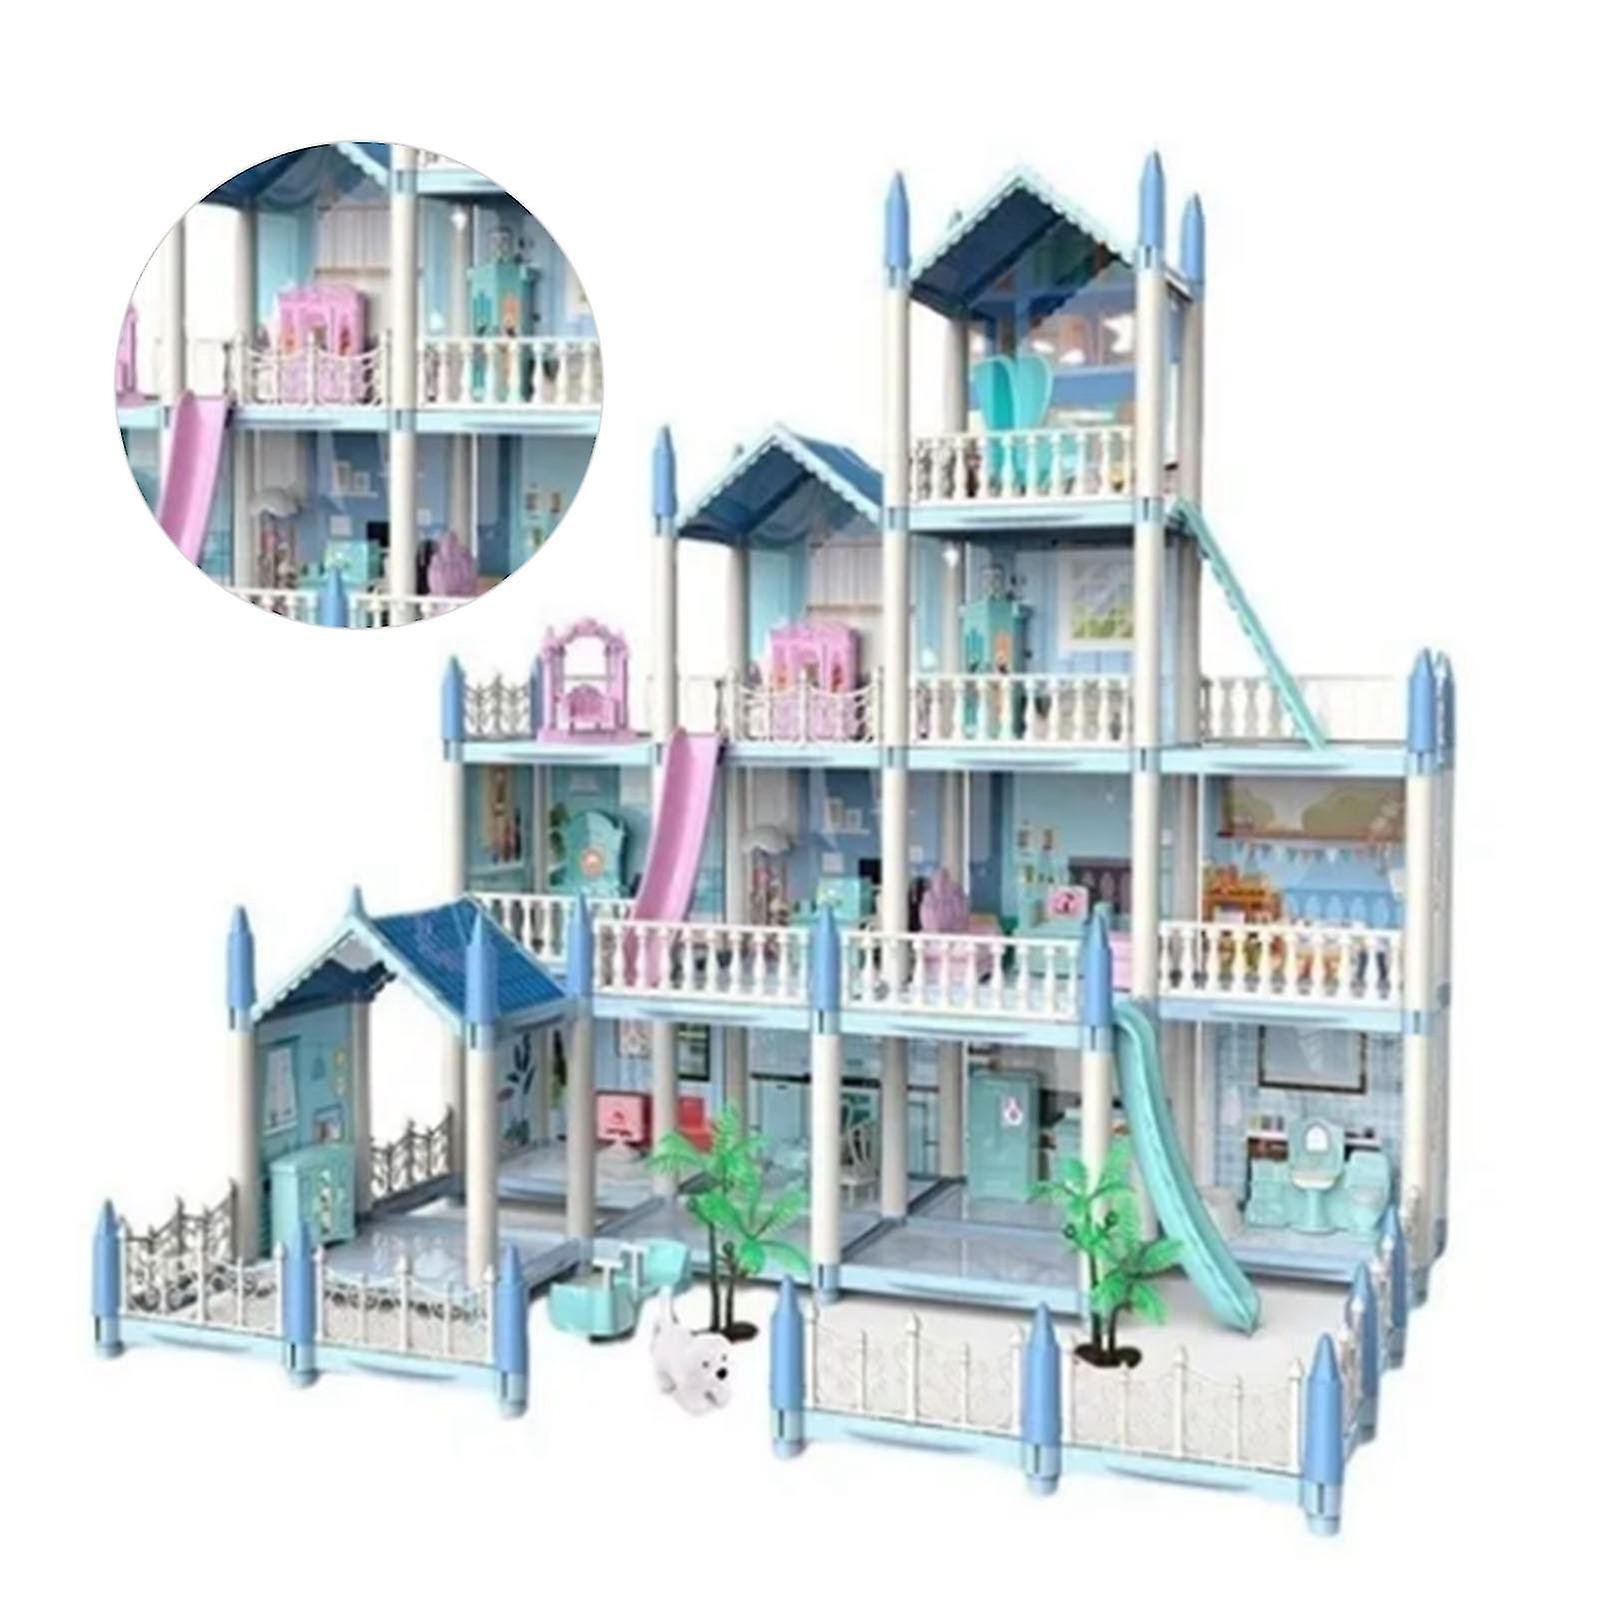 14 Rooms Doll House DIY Doll House Princess Castle Girl Toy Furniture Accessories Christmas Birthday Gift